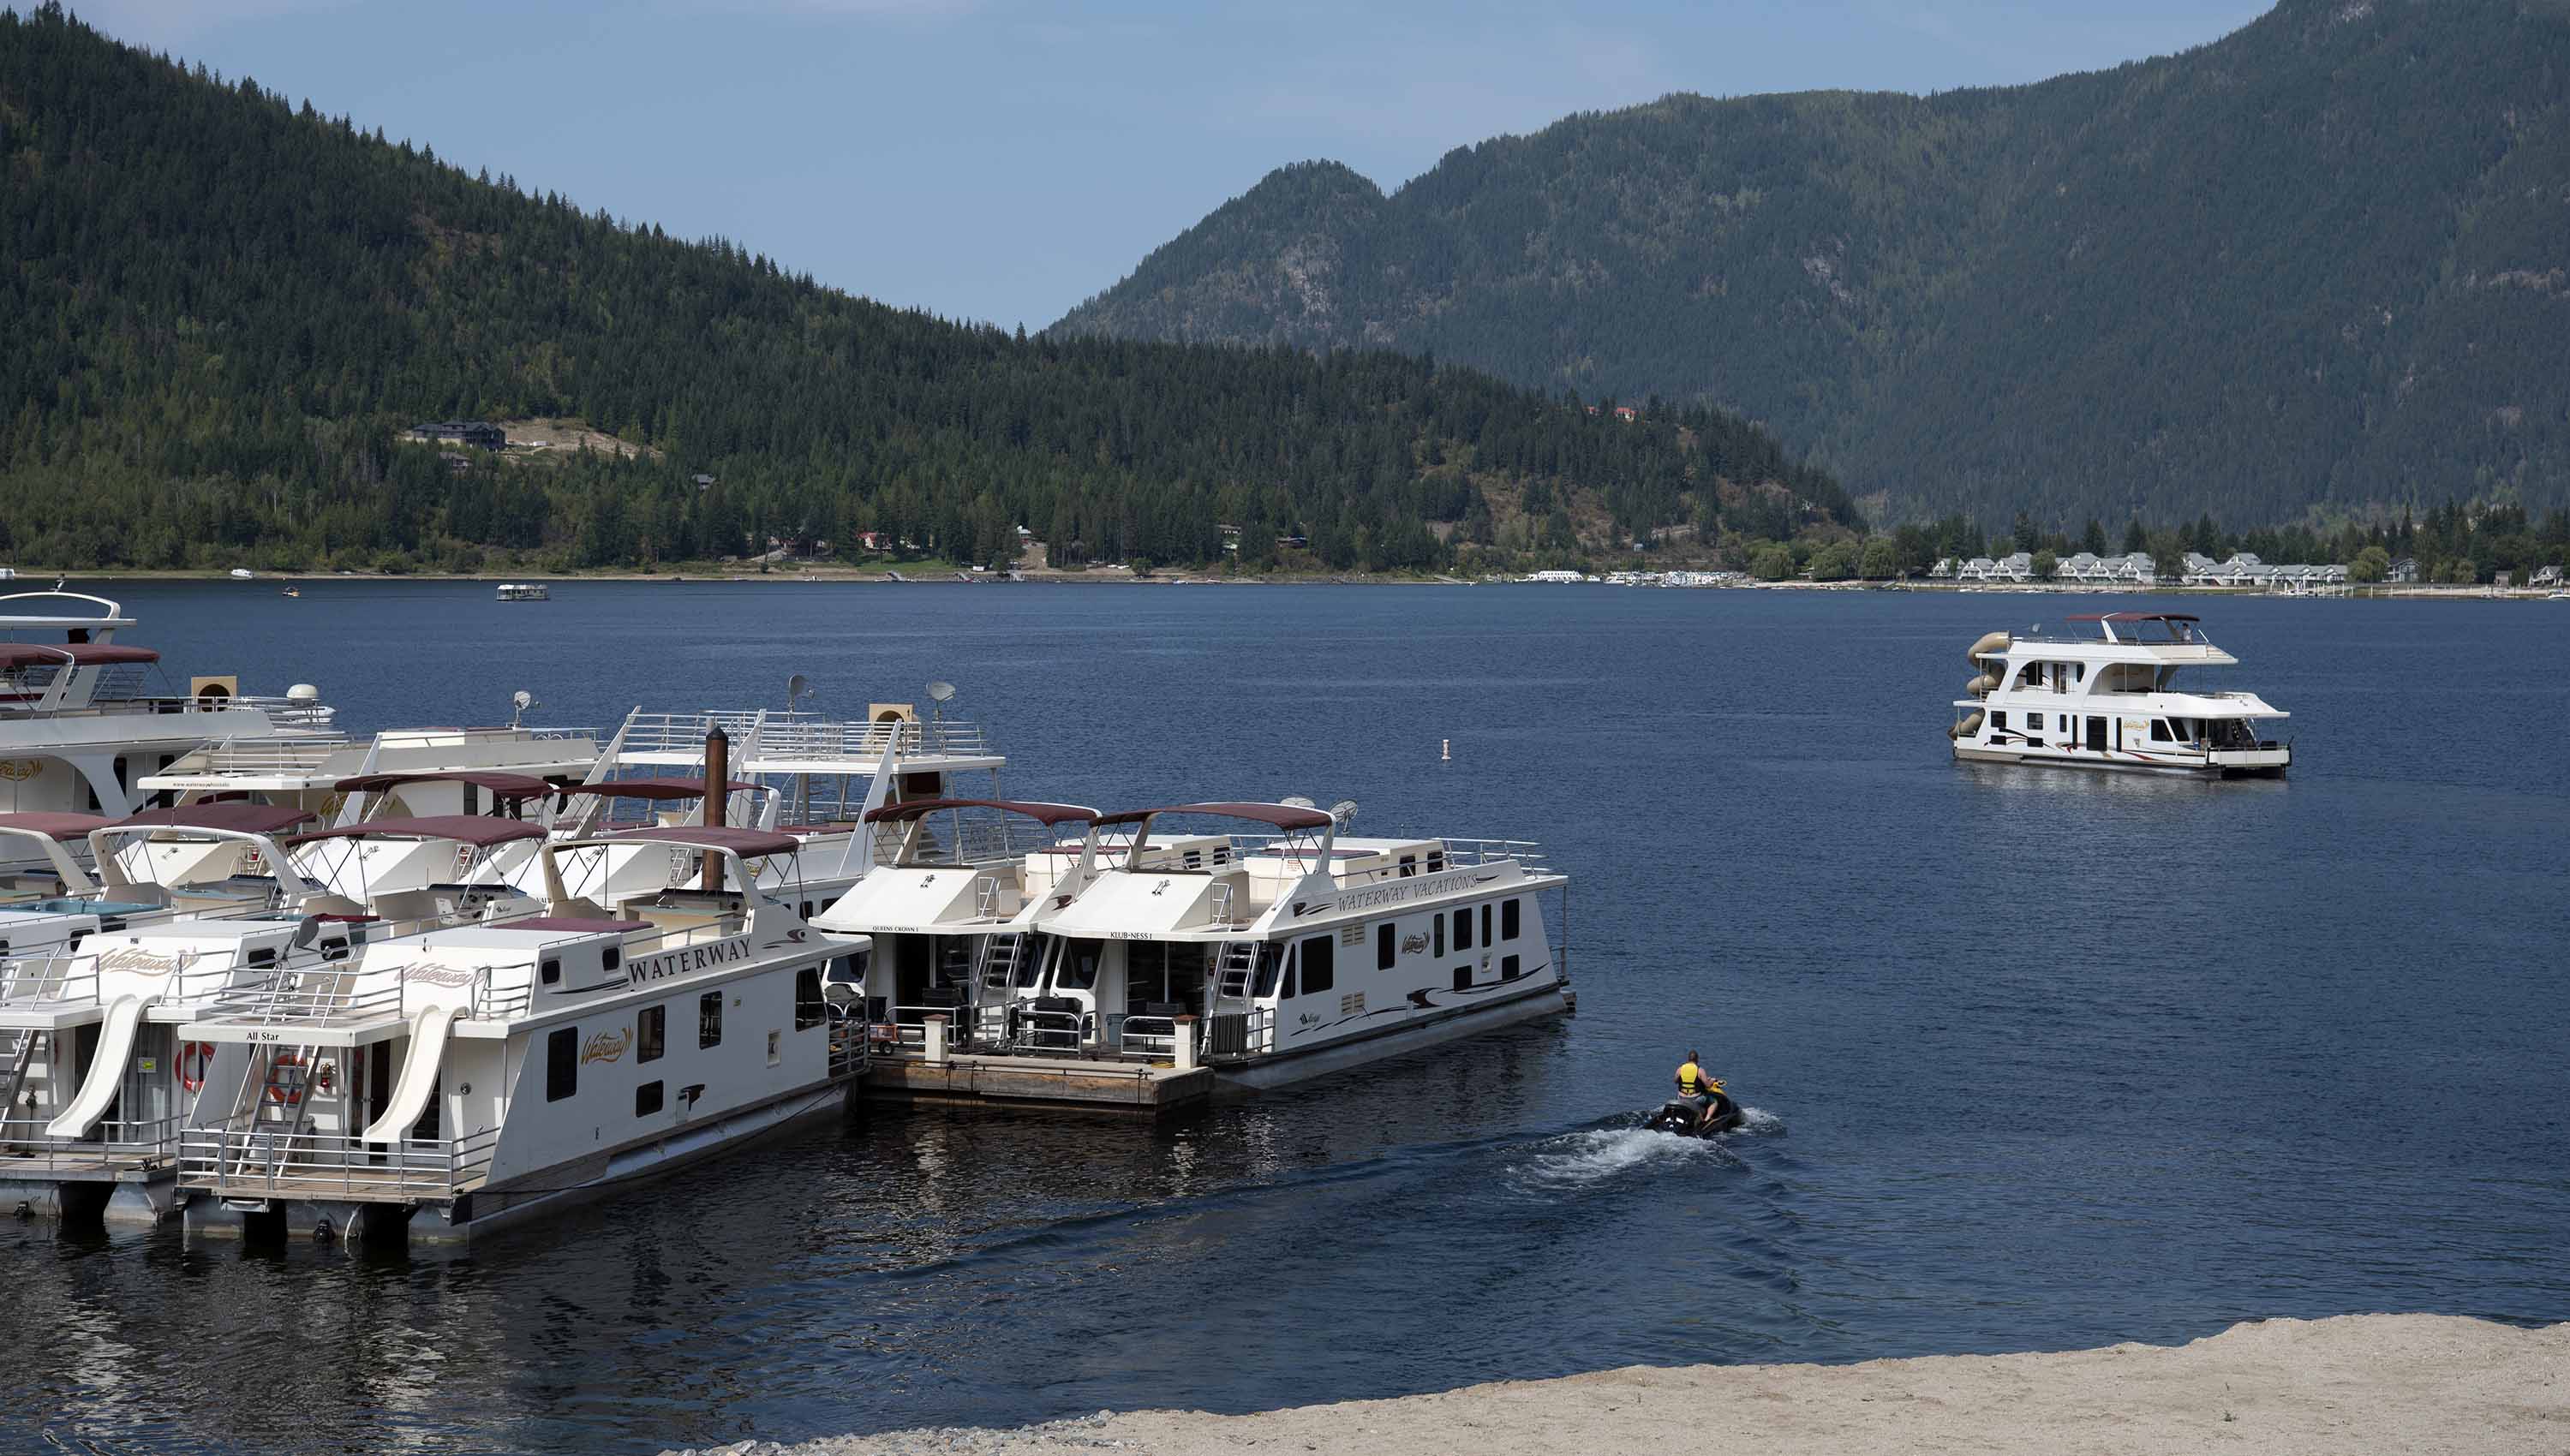 Sicamous Houseboats marine with houseboats docked at the marine and a seadoo leaving.